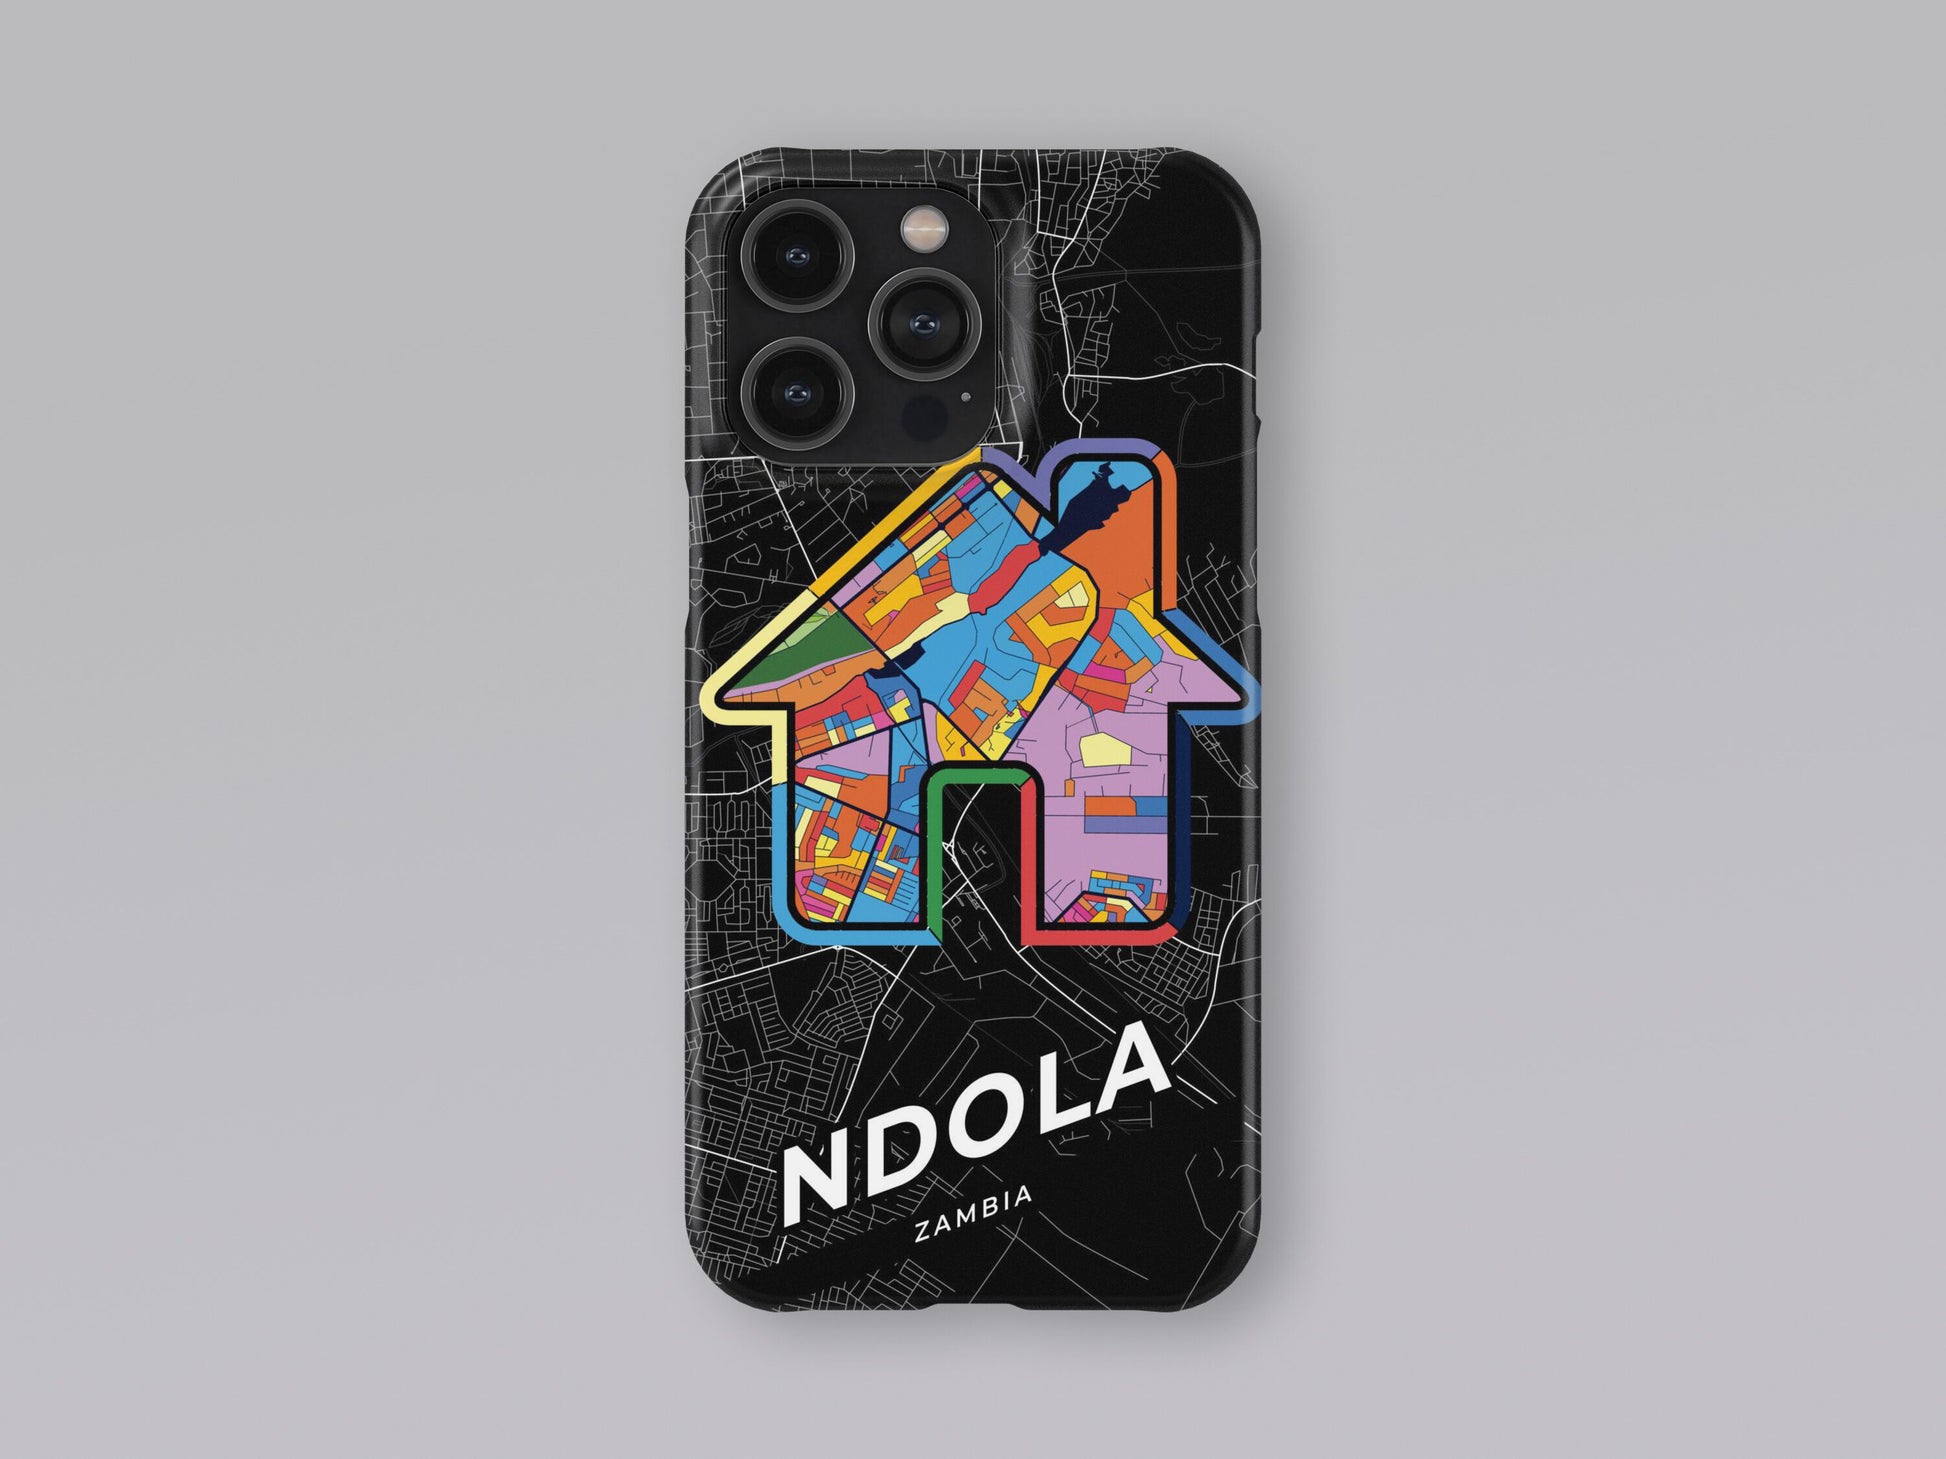 Ndola Zambia slim phone case with colorful icon. Birthday, wedding or housewarming gift. Couple match cases. 3